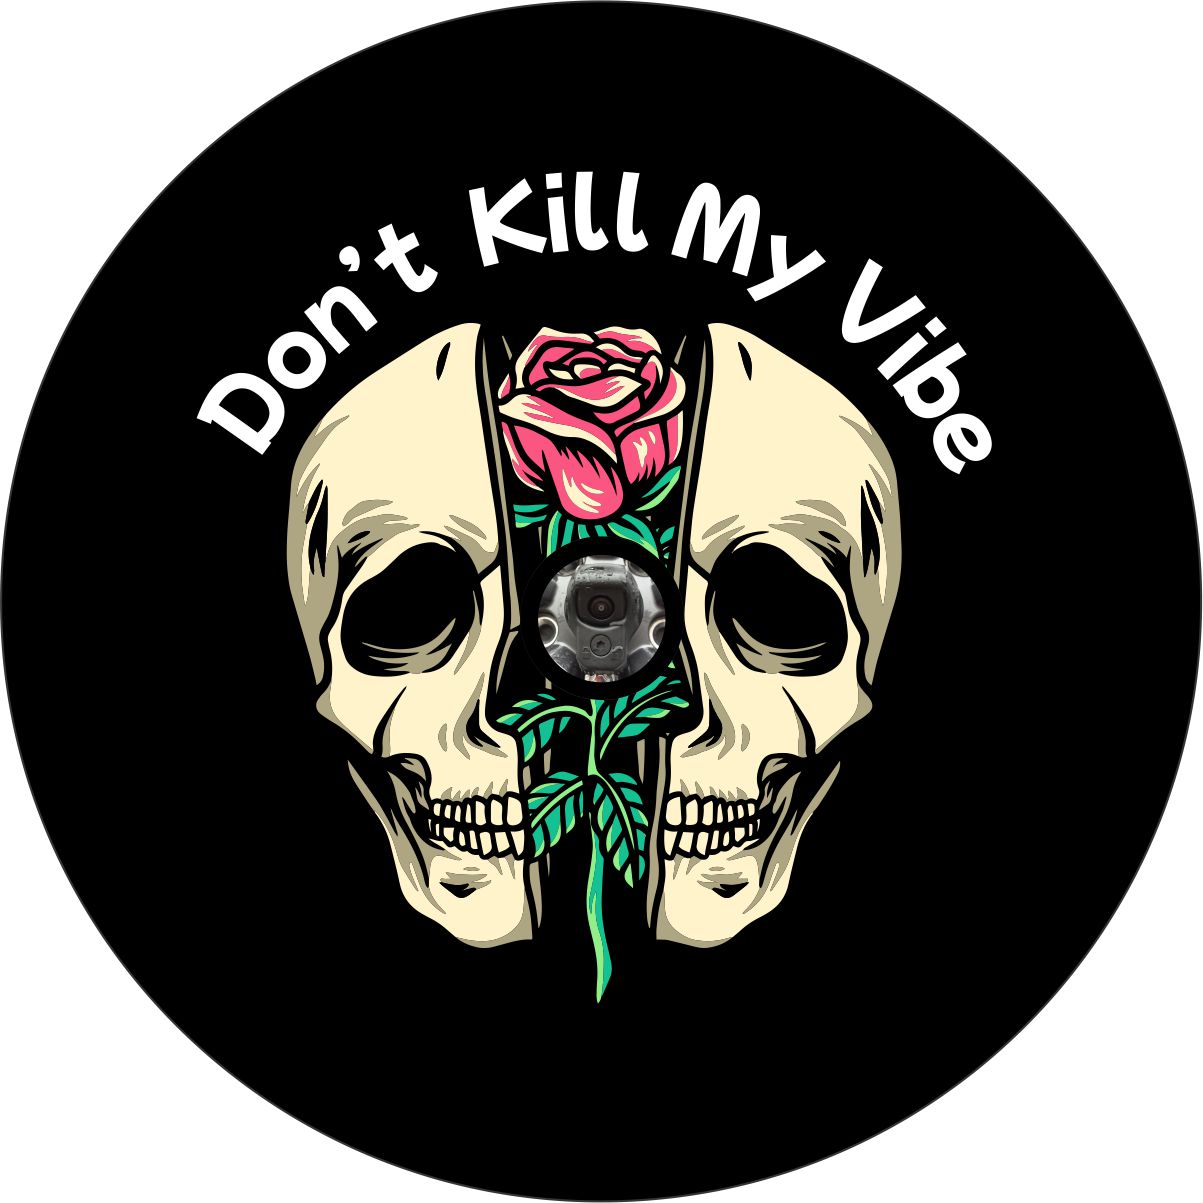 Black vinyl spare tire cover design for any vehicle including Jeep, Bronco, camper, RV, trailer, and more. Skull design split in half with a rose and the saying, "don't kill my vibe" with a space for a back up camera hole.